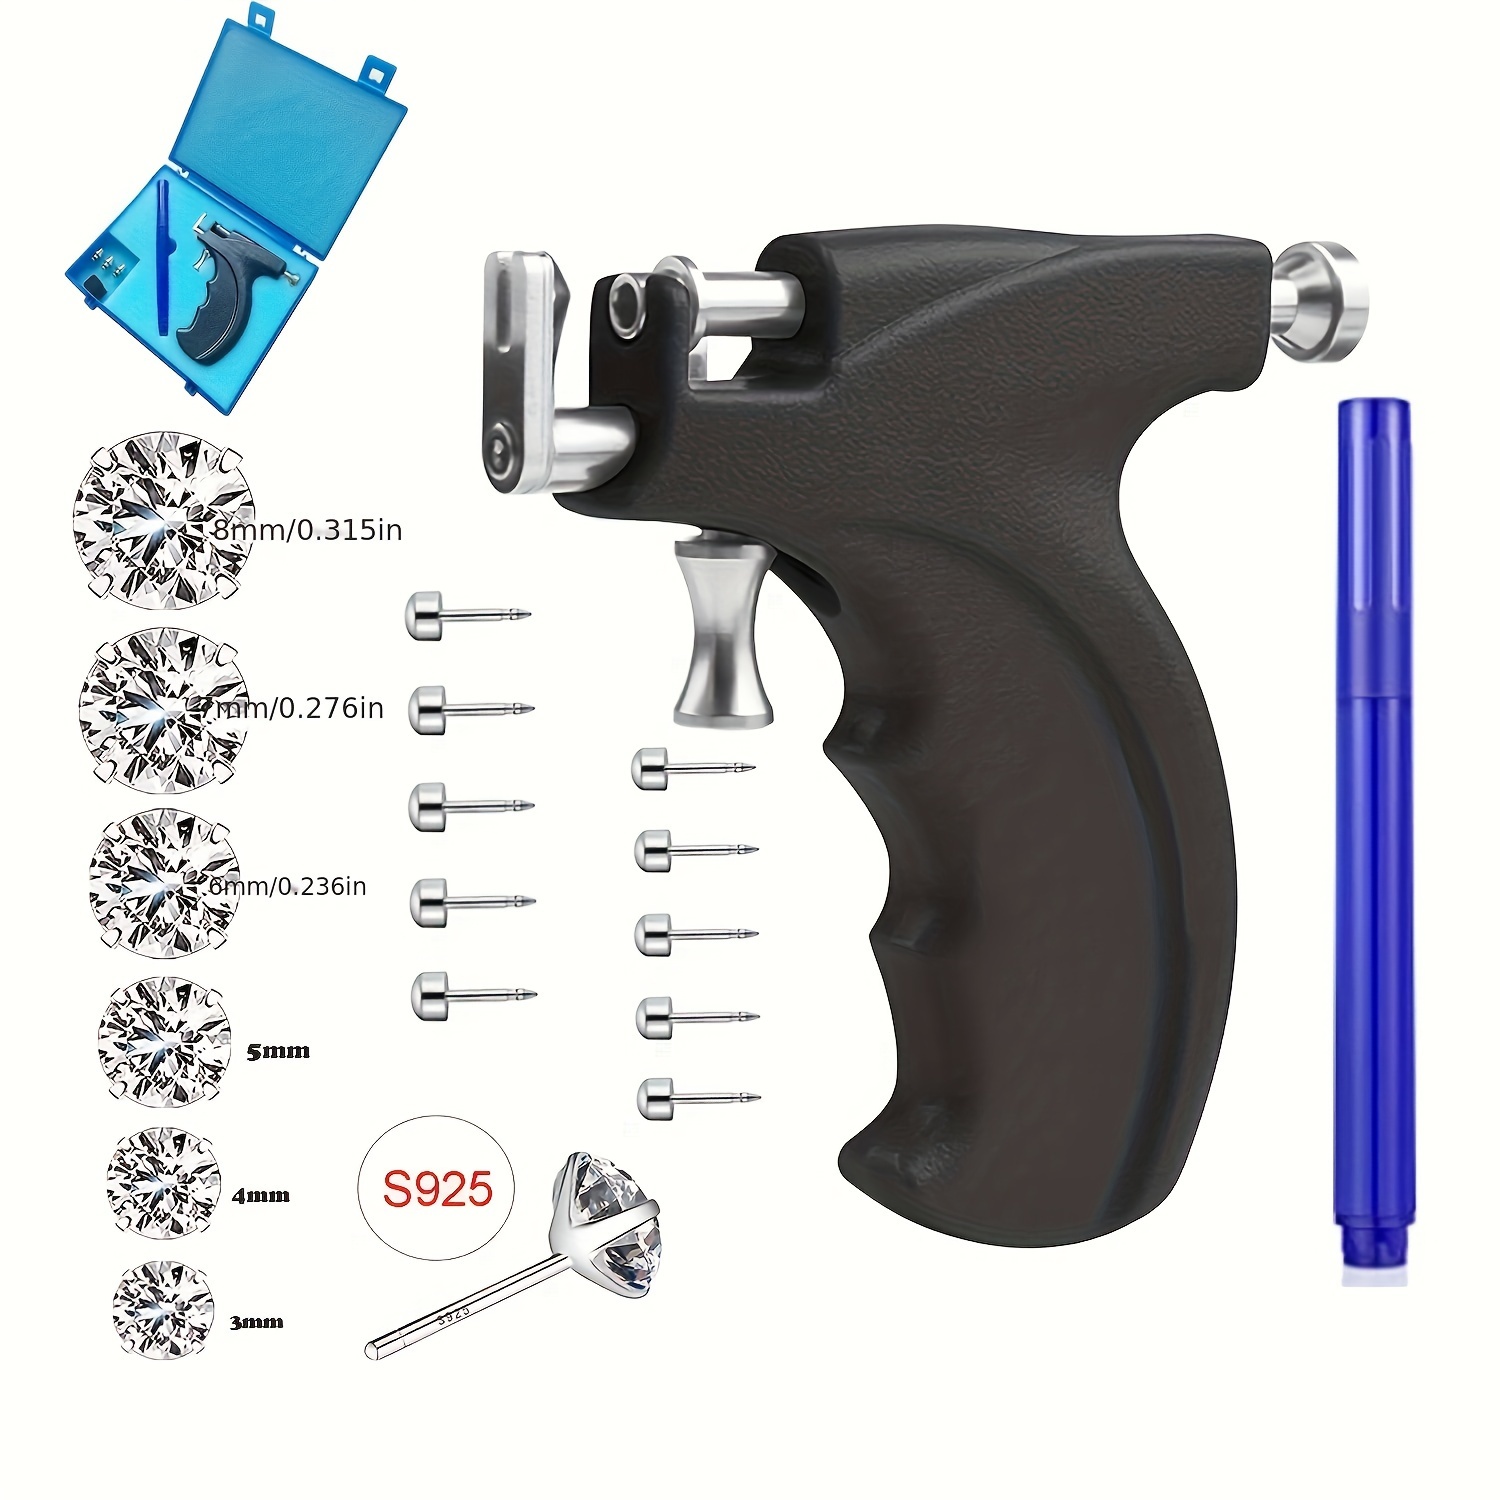 

Professional Ear Piercing Gun Kit Reusable For Body Nose Lip Piercing With 16 Pairs Hypoallergenic Earrings (6 Pairs Sterling Silvery Stud Earrings, 18k White Gold Plated + 10 Pairs Gun Stud Earrings)